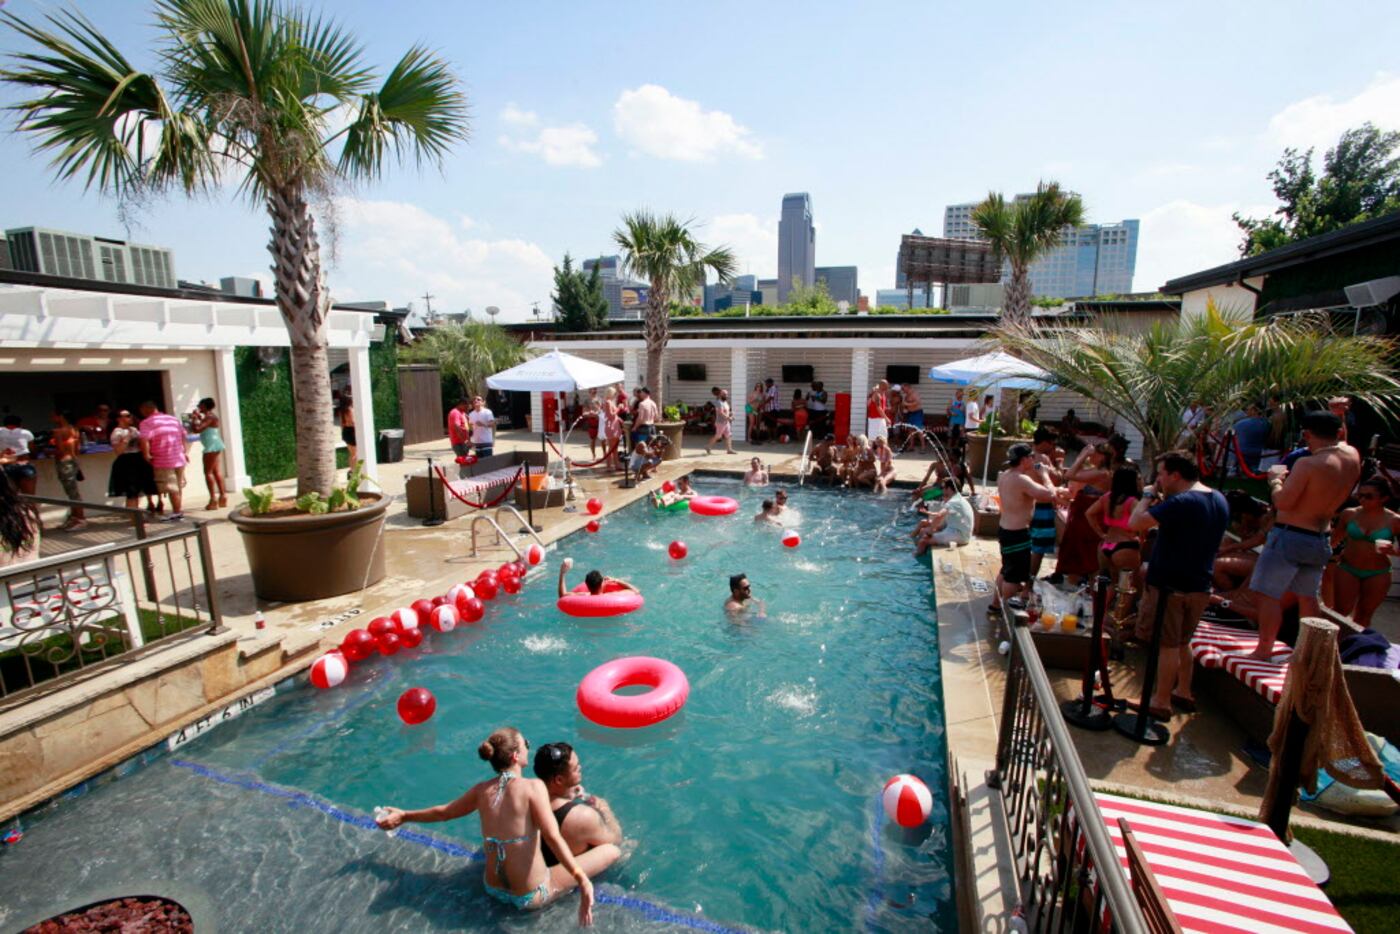 A look at the scene at Bungalow's pool last Sunday.